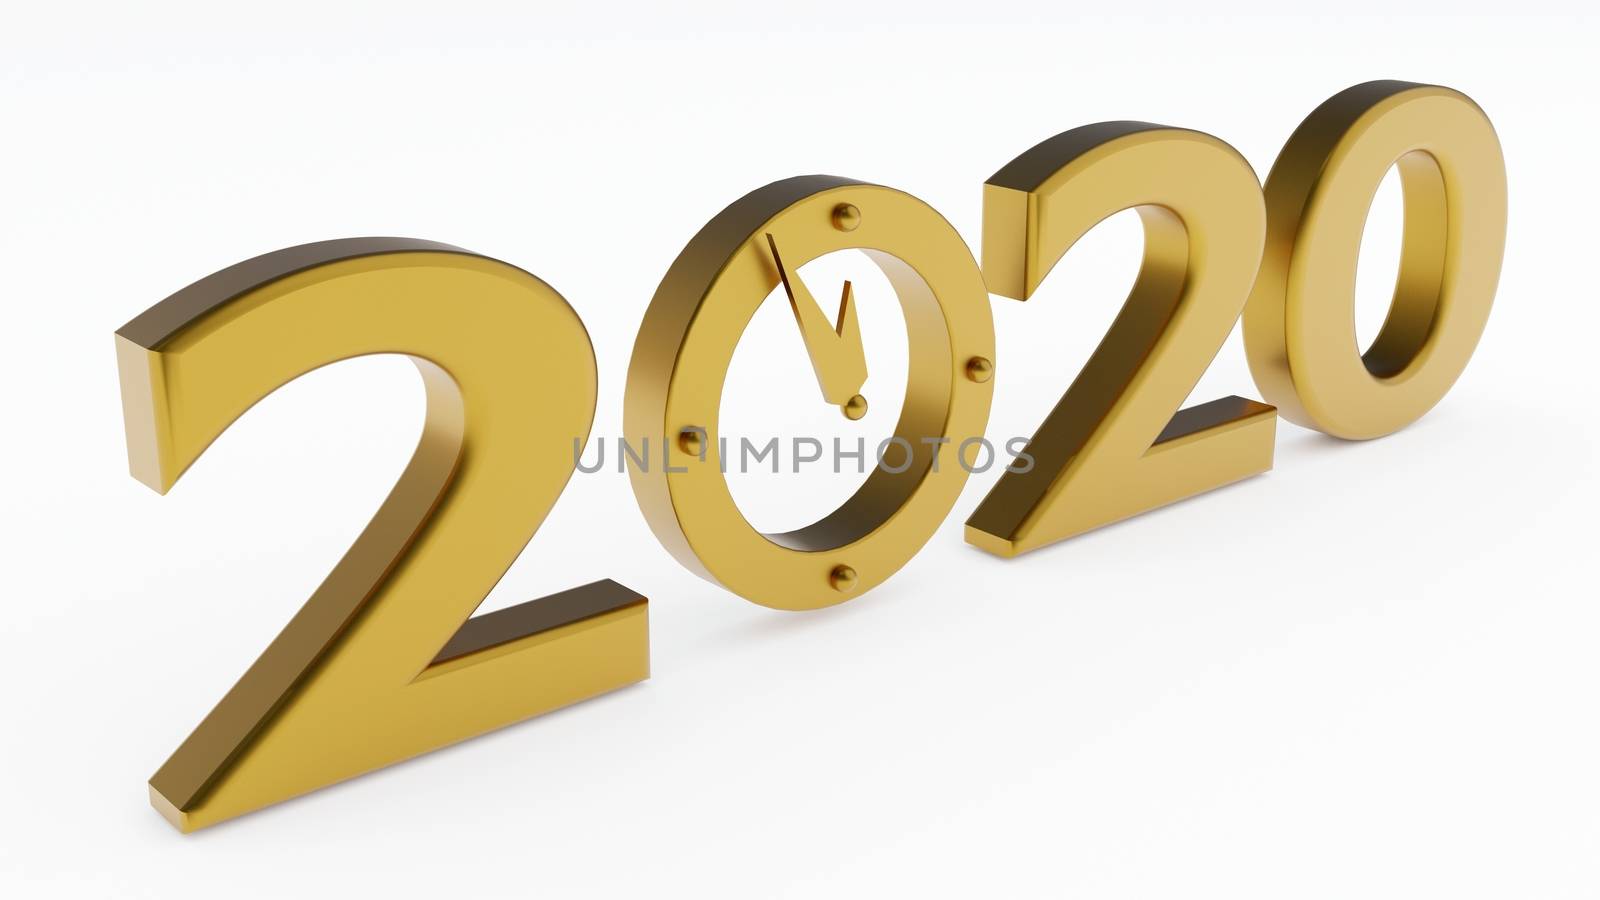 2020 years and clock, 3d illustration on the white background